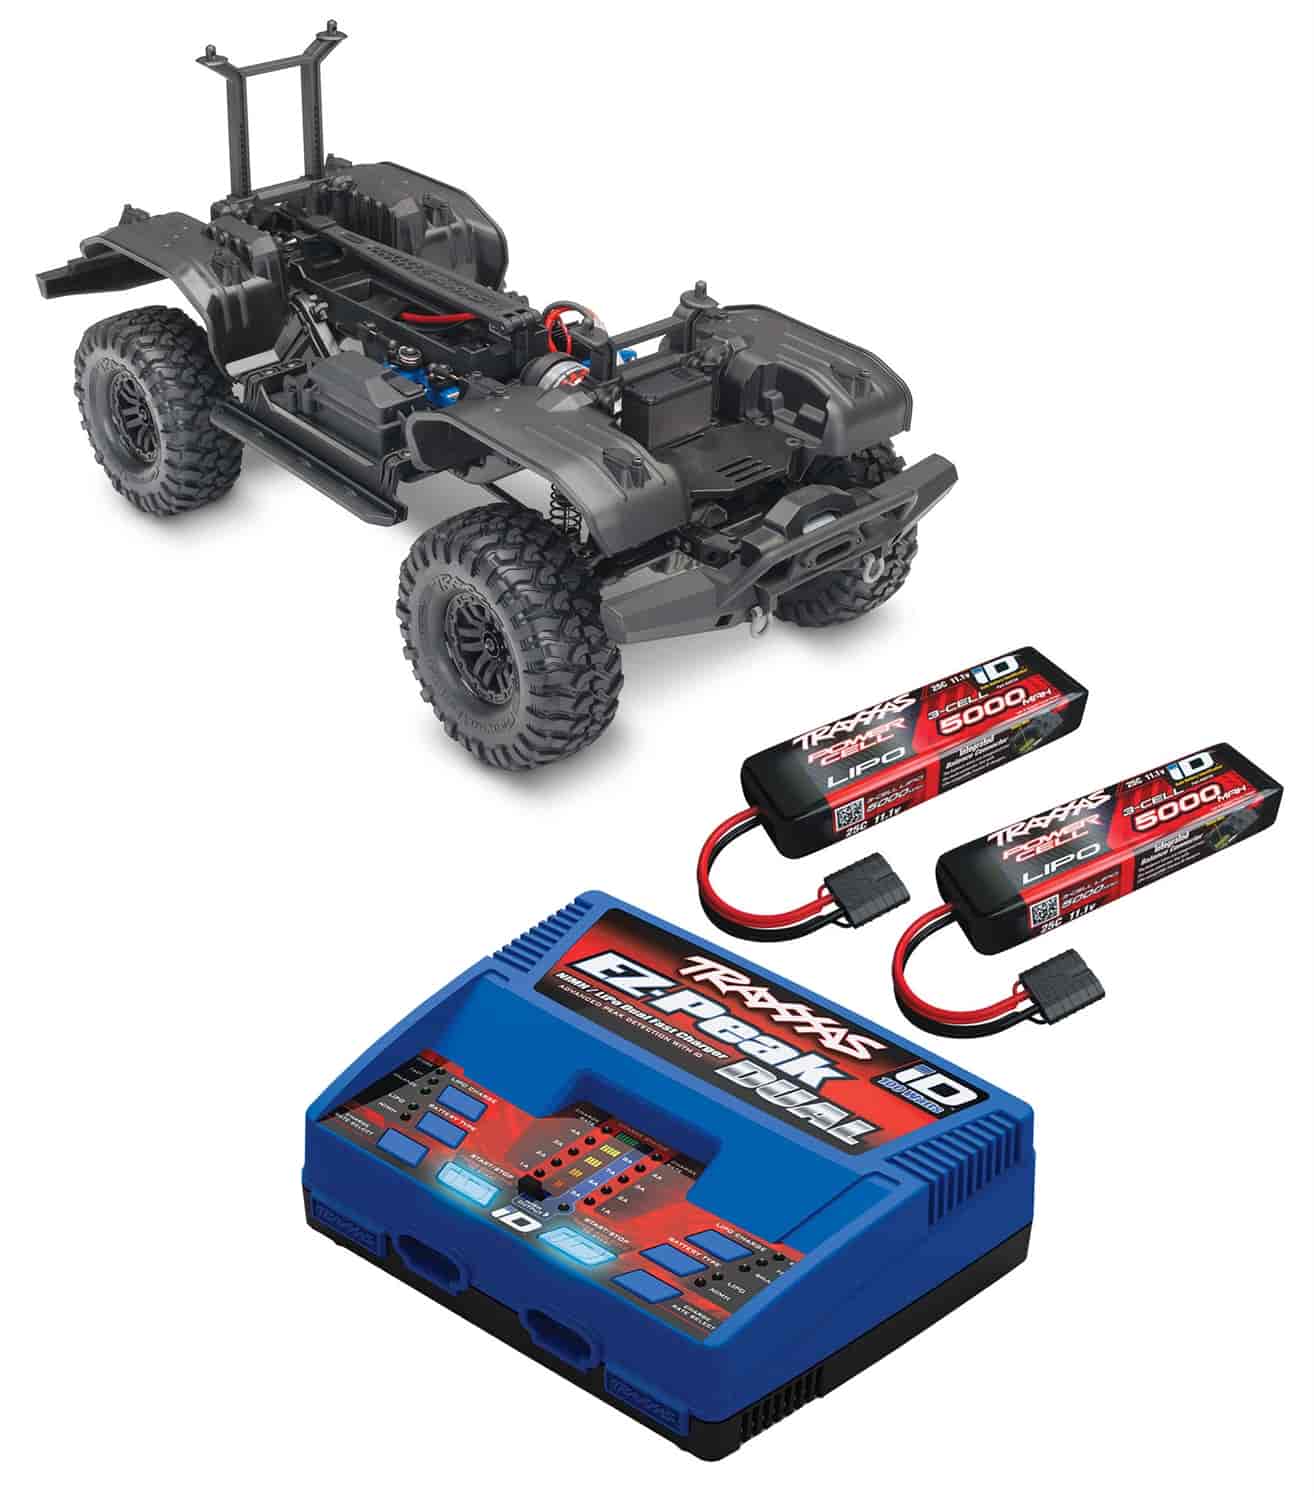 TRX-4 Chassis Batteries and Charger Kit